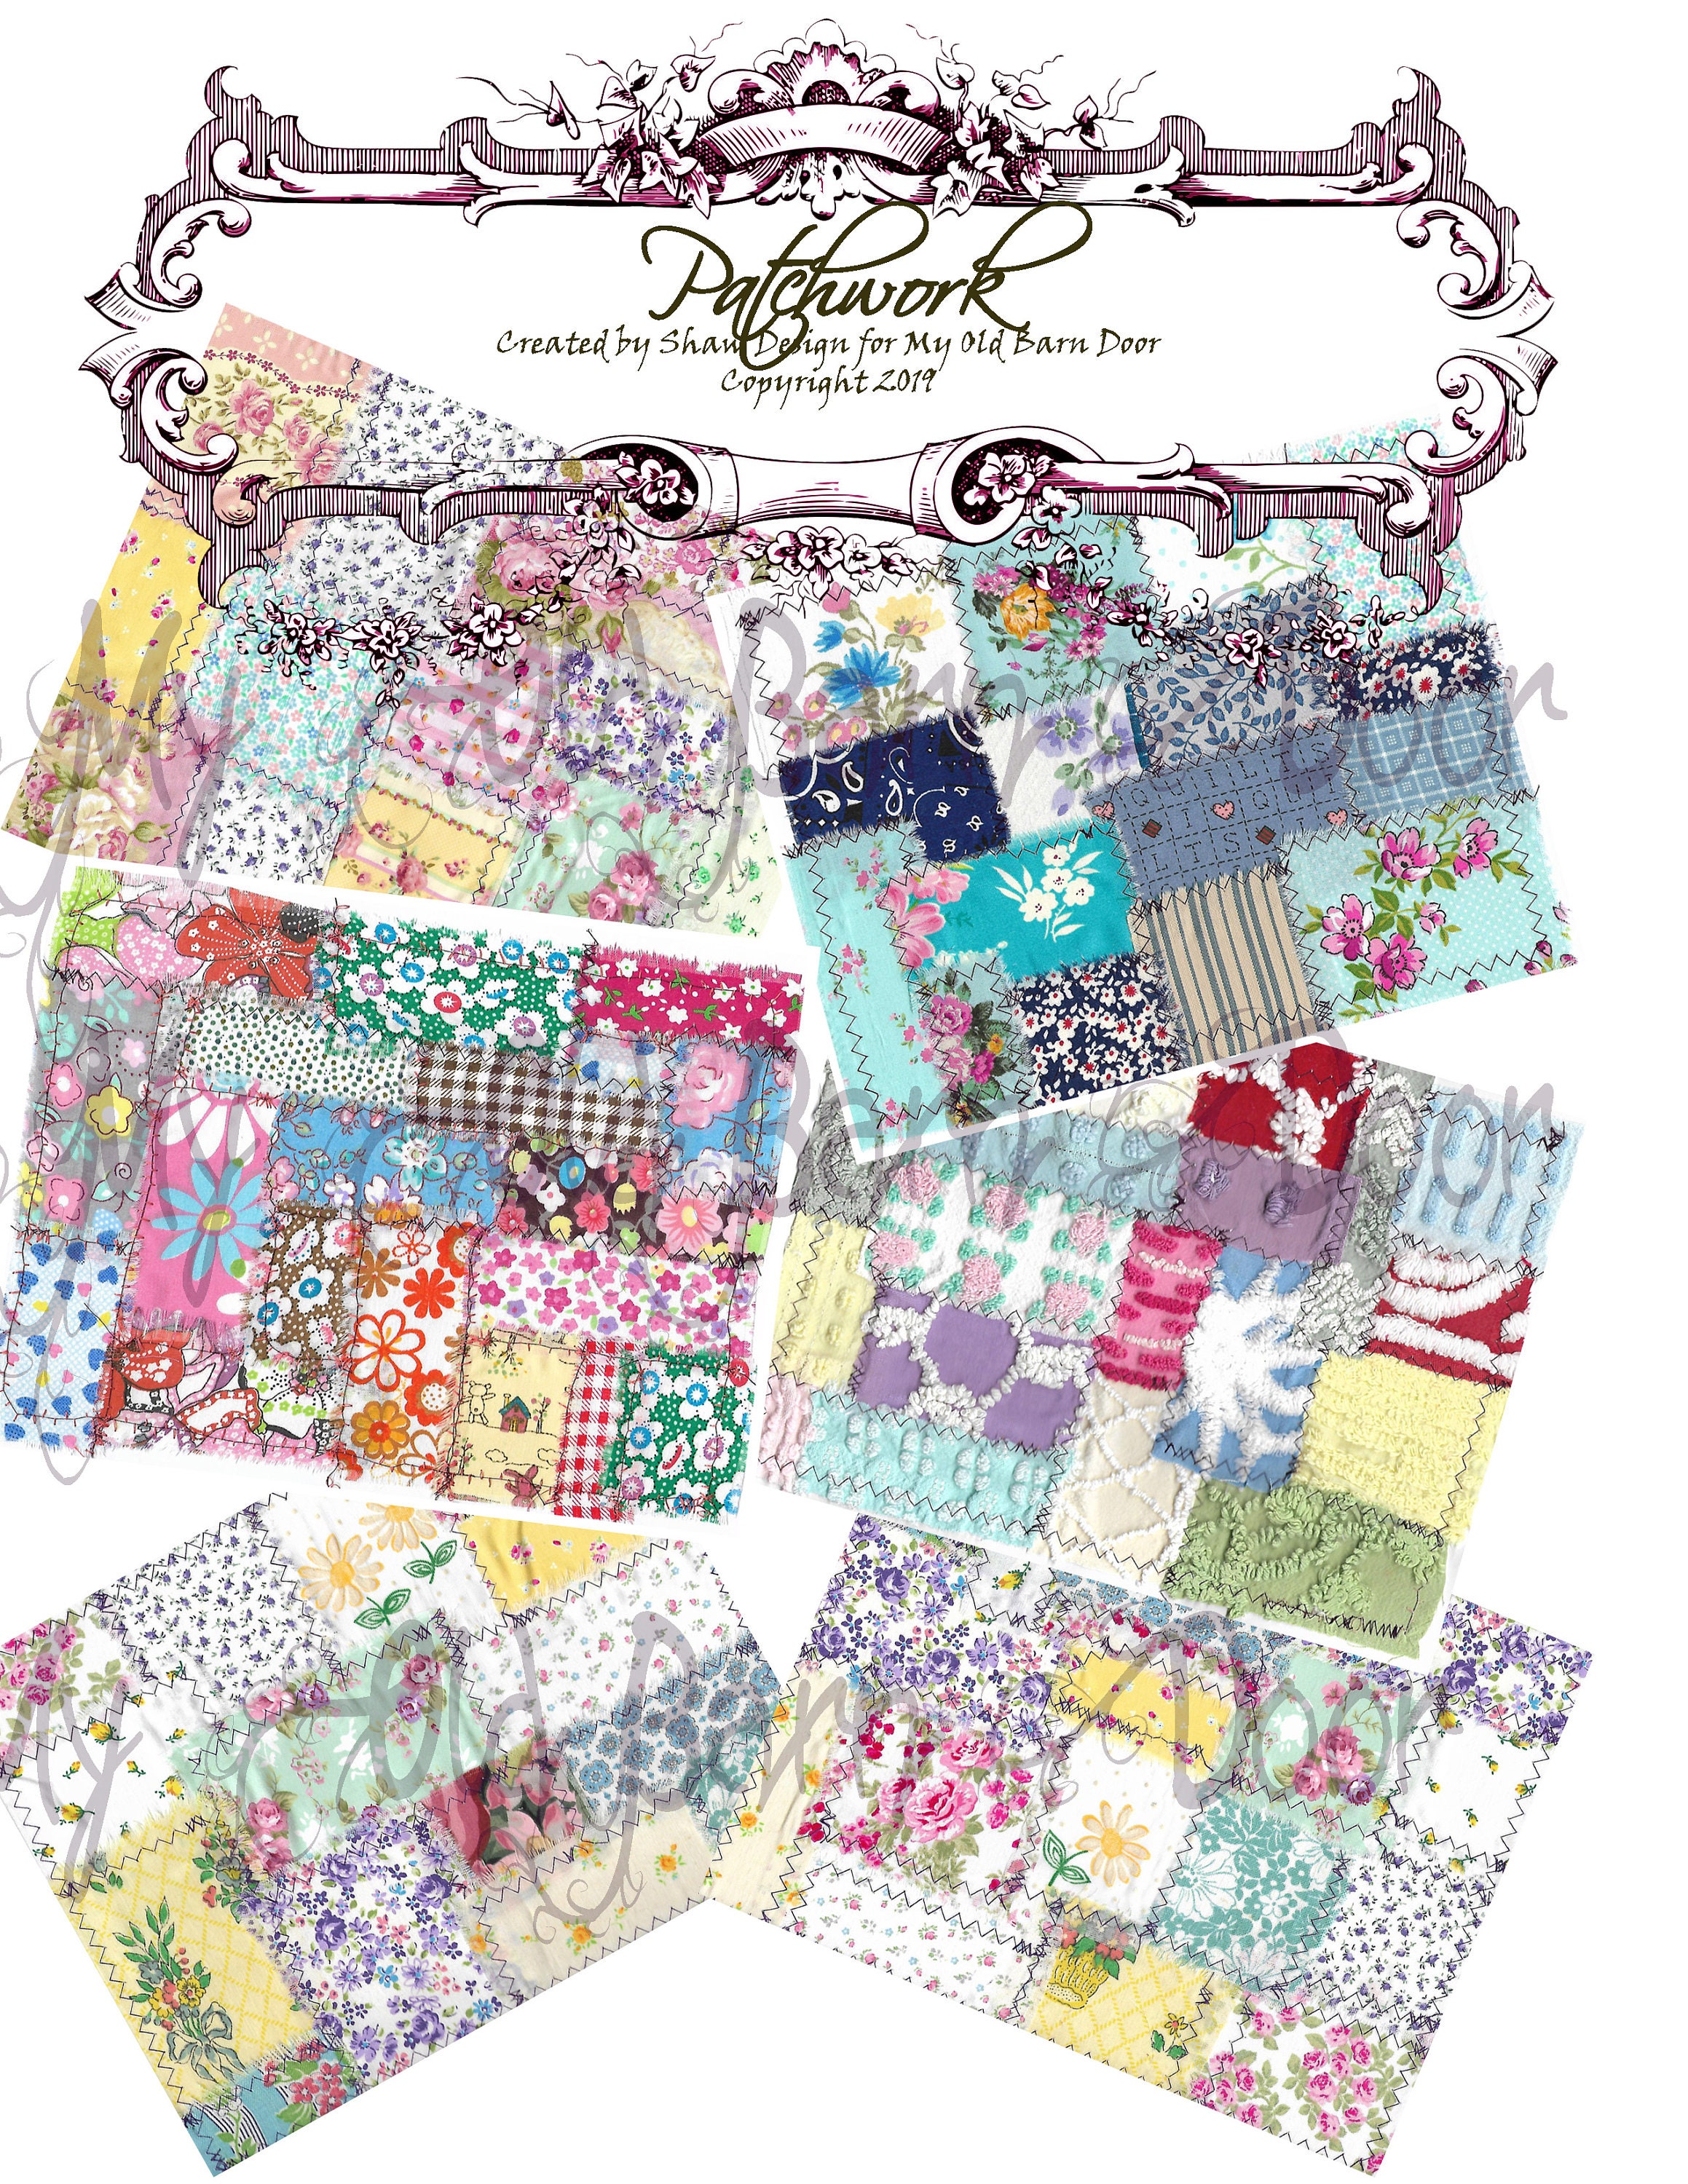 Patchwork quilt stationery stickers